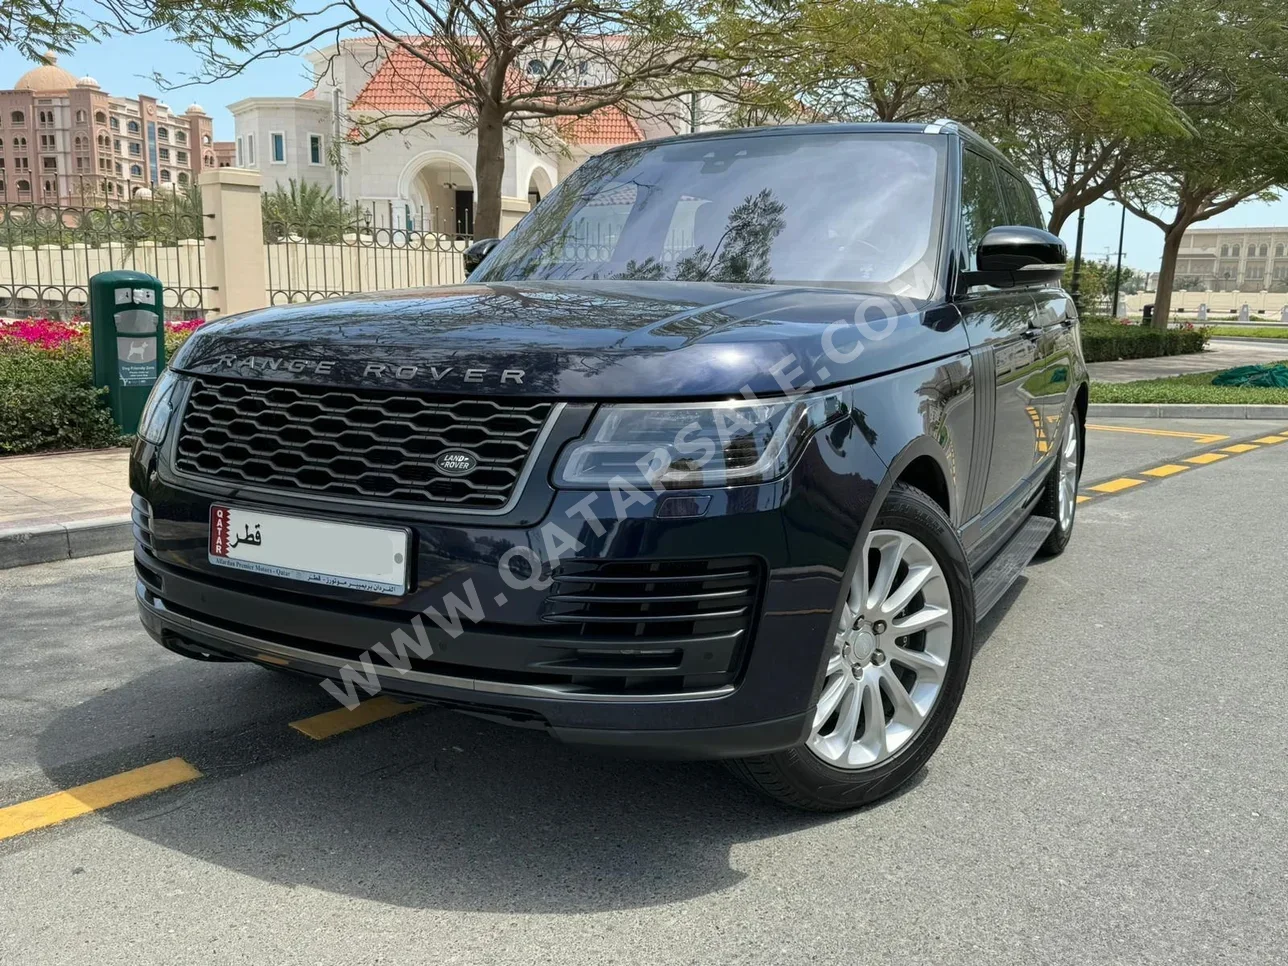 Land Rover  Range Rover  Vogue HSE  2020  Automatic  73,000 Km  6 Cylinder  Four Wheel Drive (4WD)  SUV  Dark Blue  With Warranty